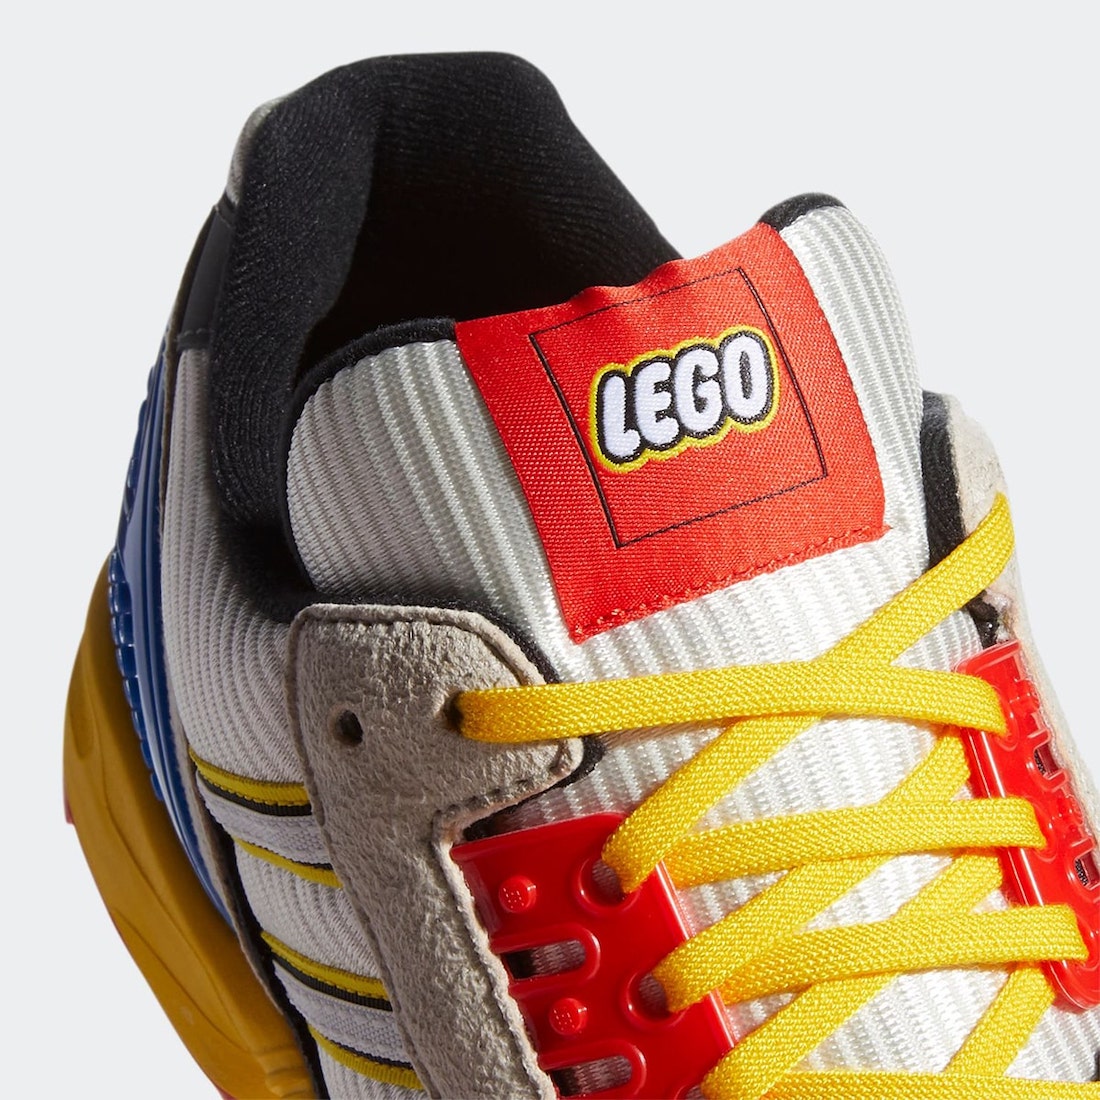 New Adidas shoes can be customized with Lego pieces - CNET